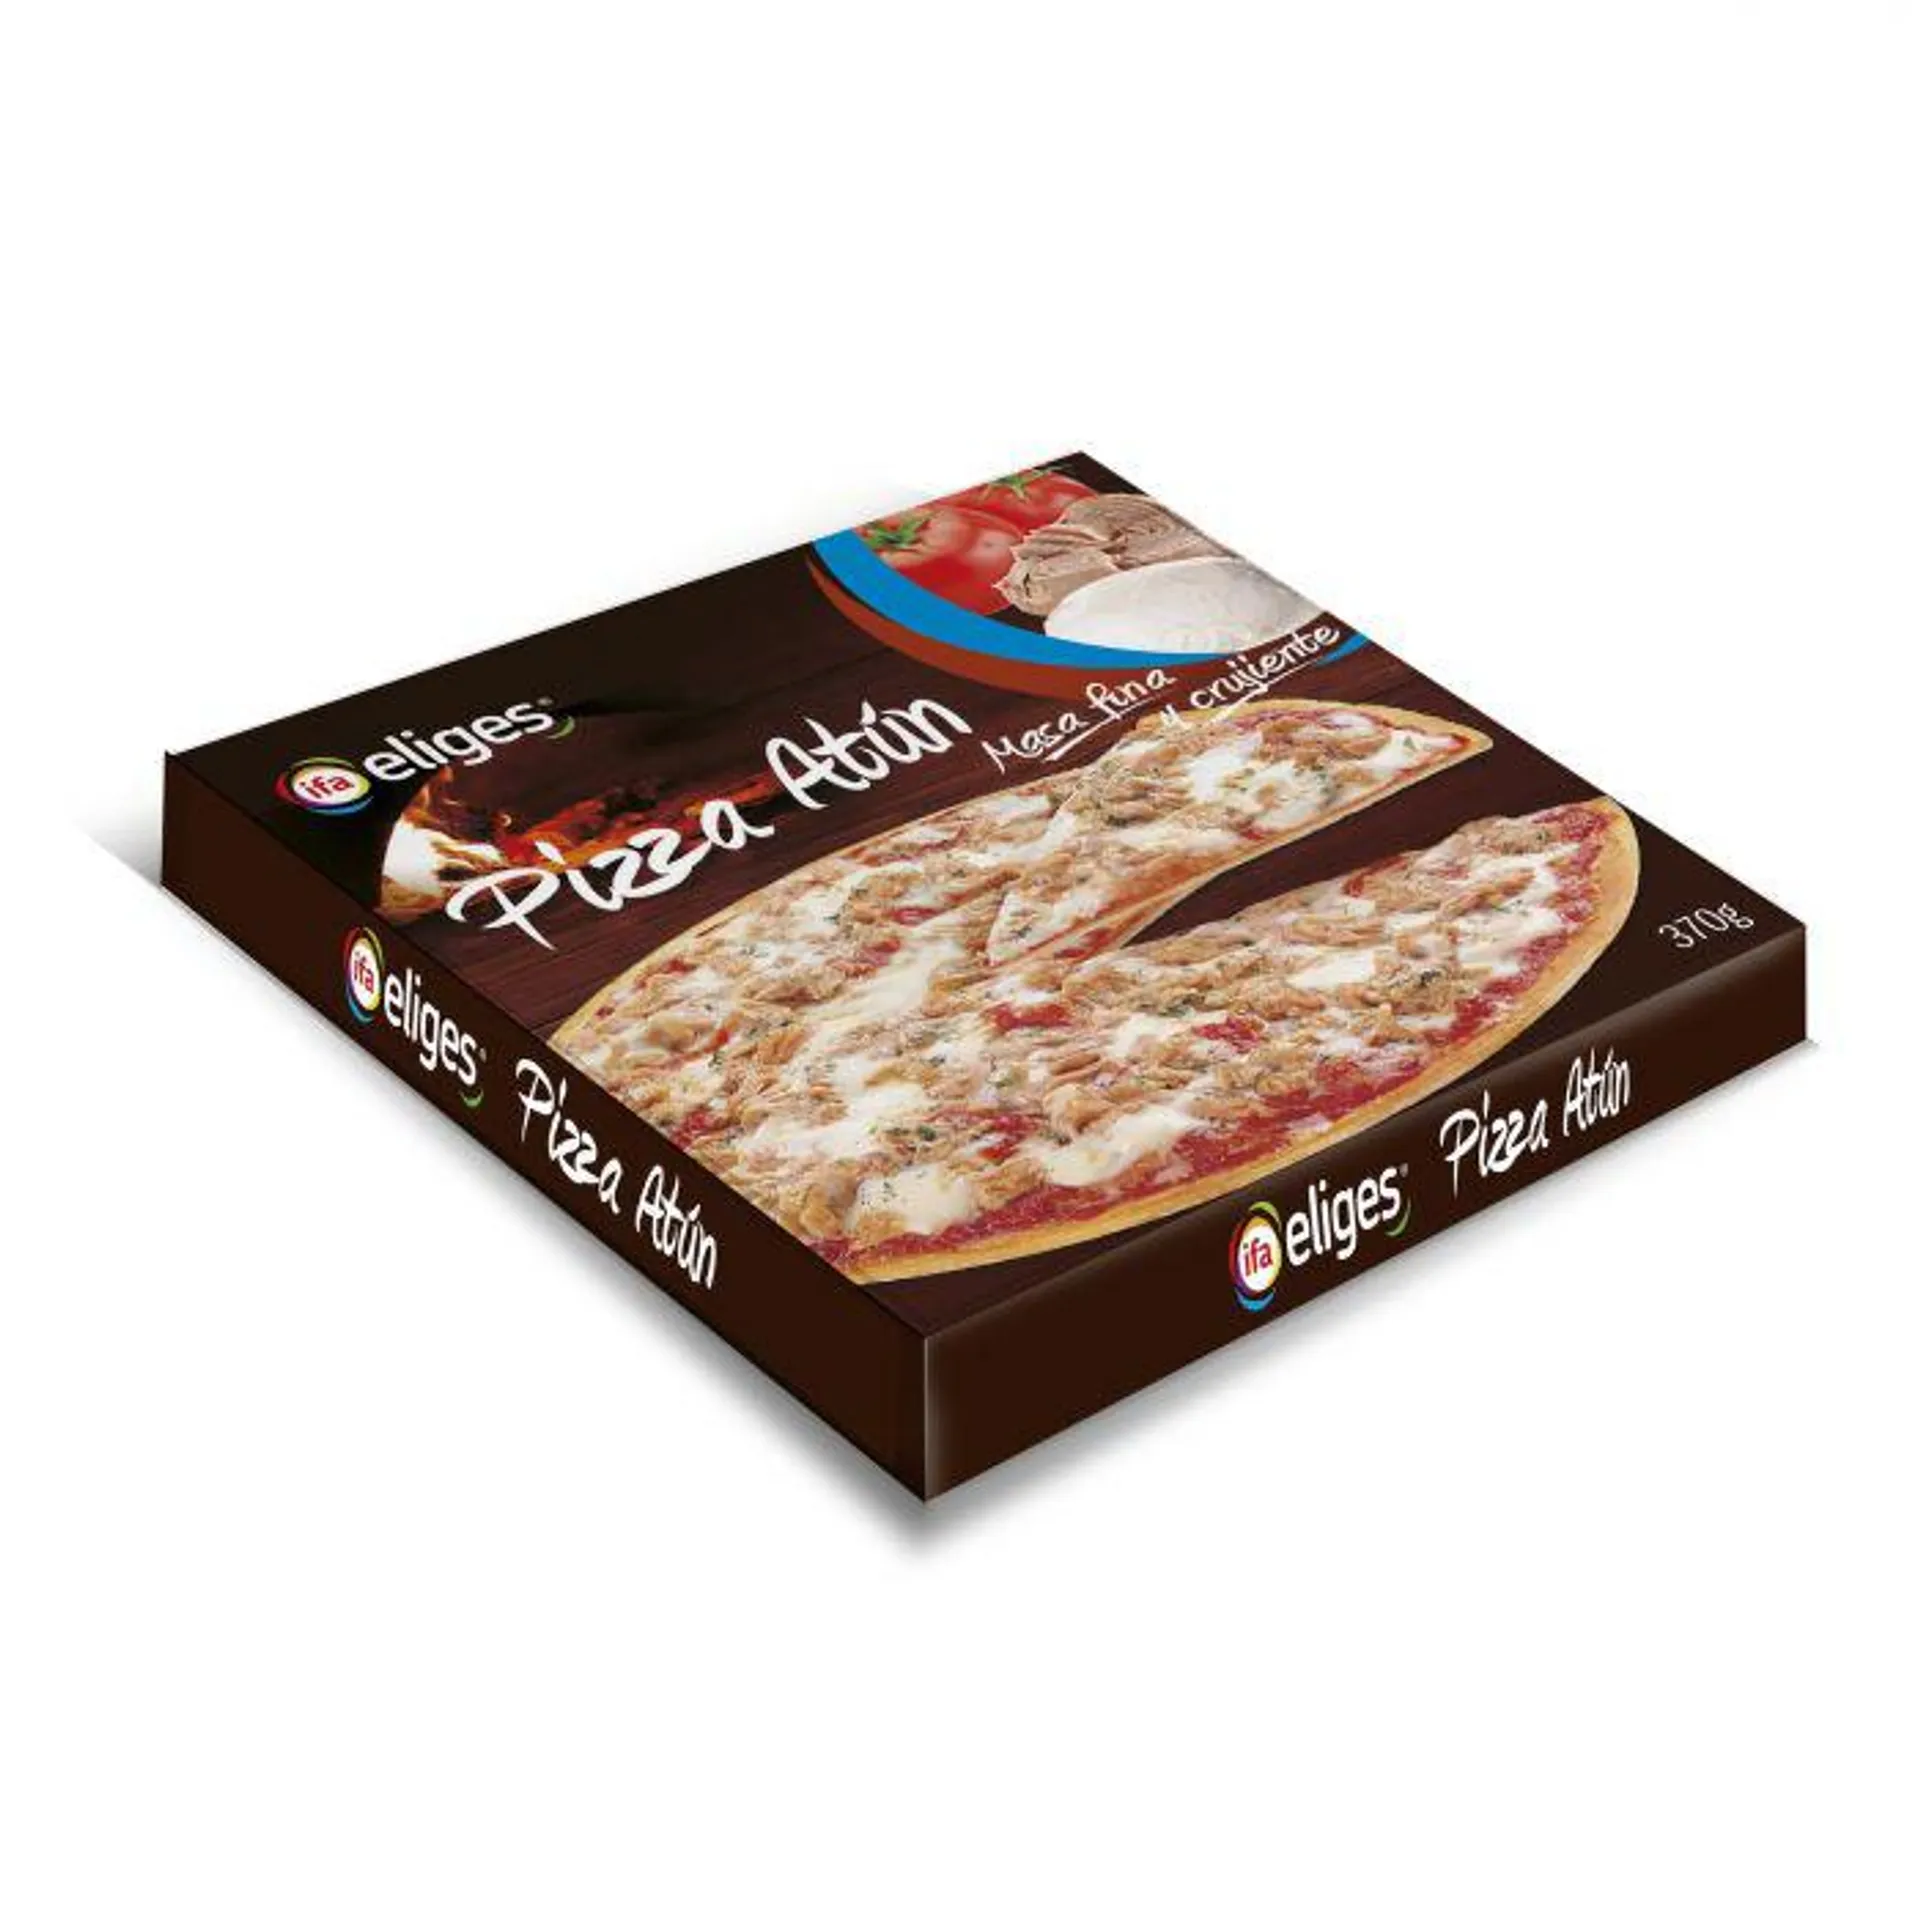 Pizza atun ifa eliges 370g